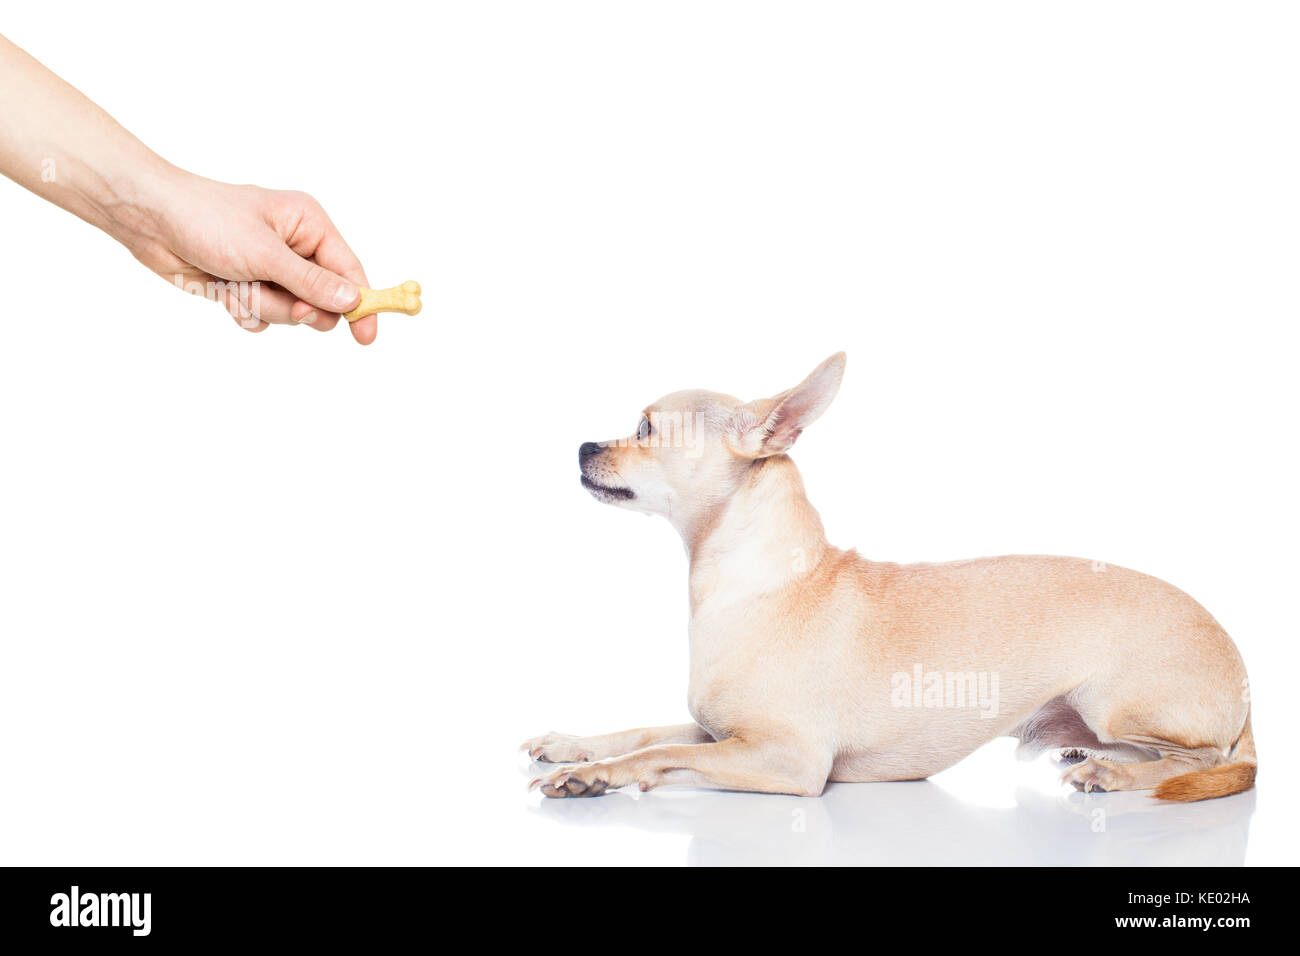 chihuahua dog getting a cookie as a treat for good behavior,isolated on white background Stock Photo